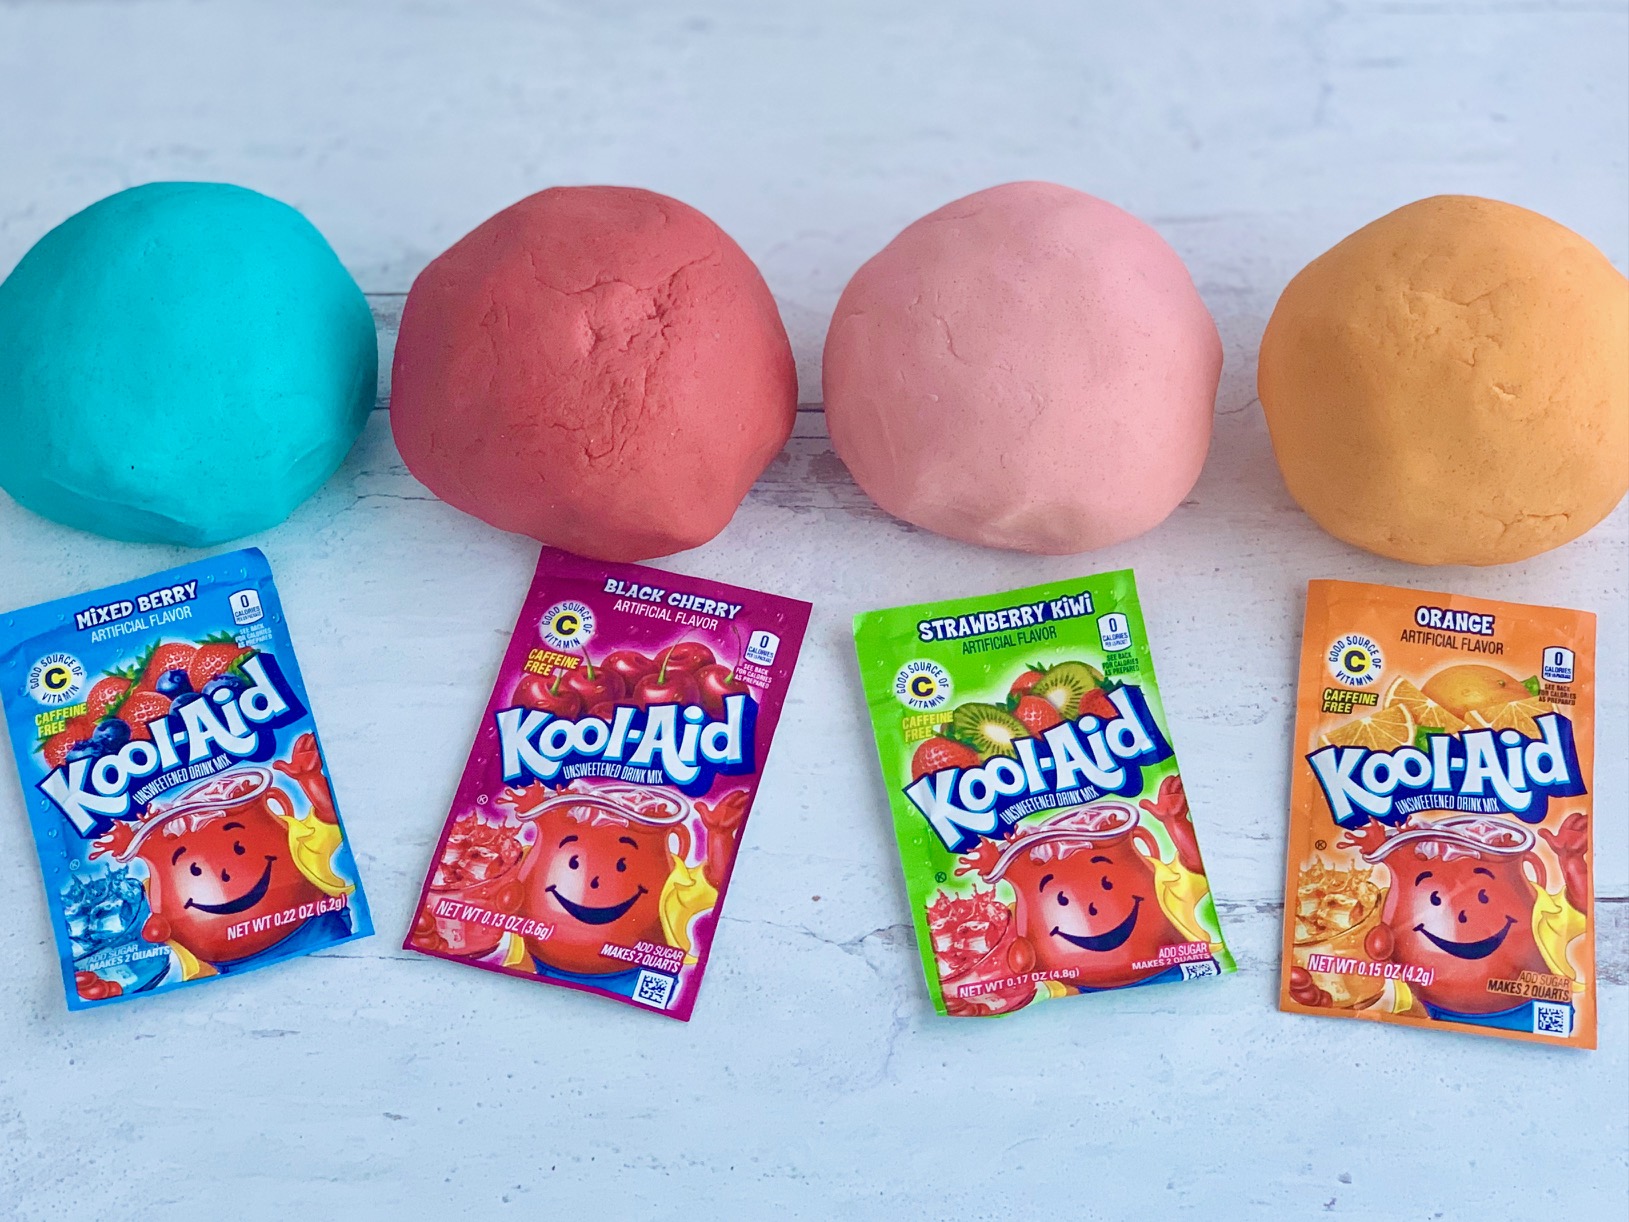 4 colorful balls of playdough next to matching packets of Kool-Aid.